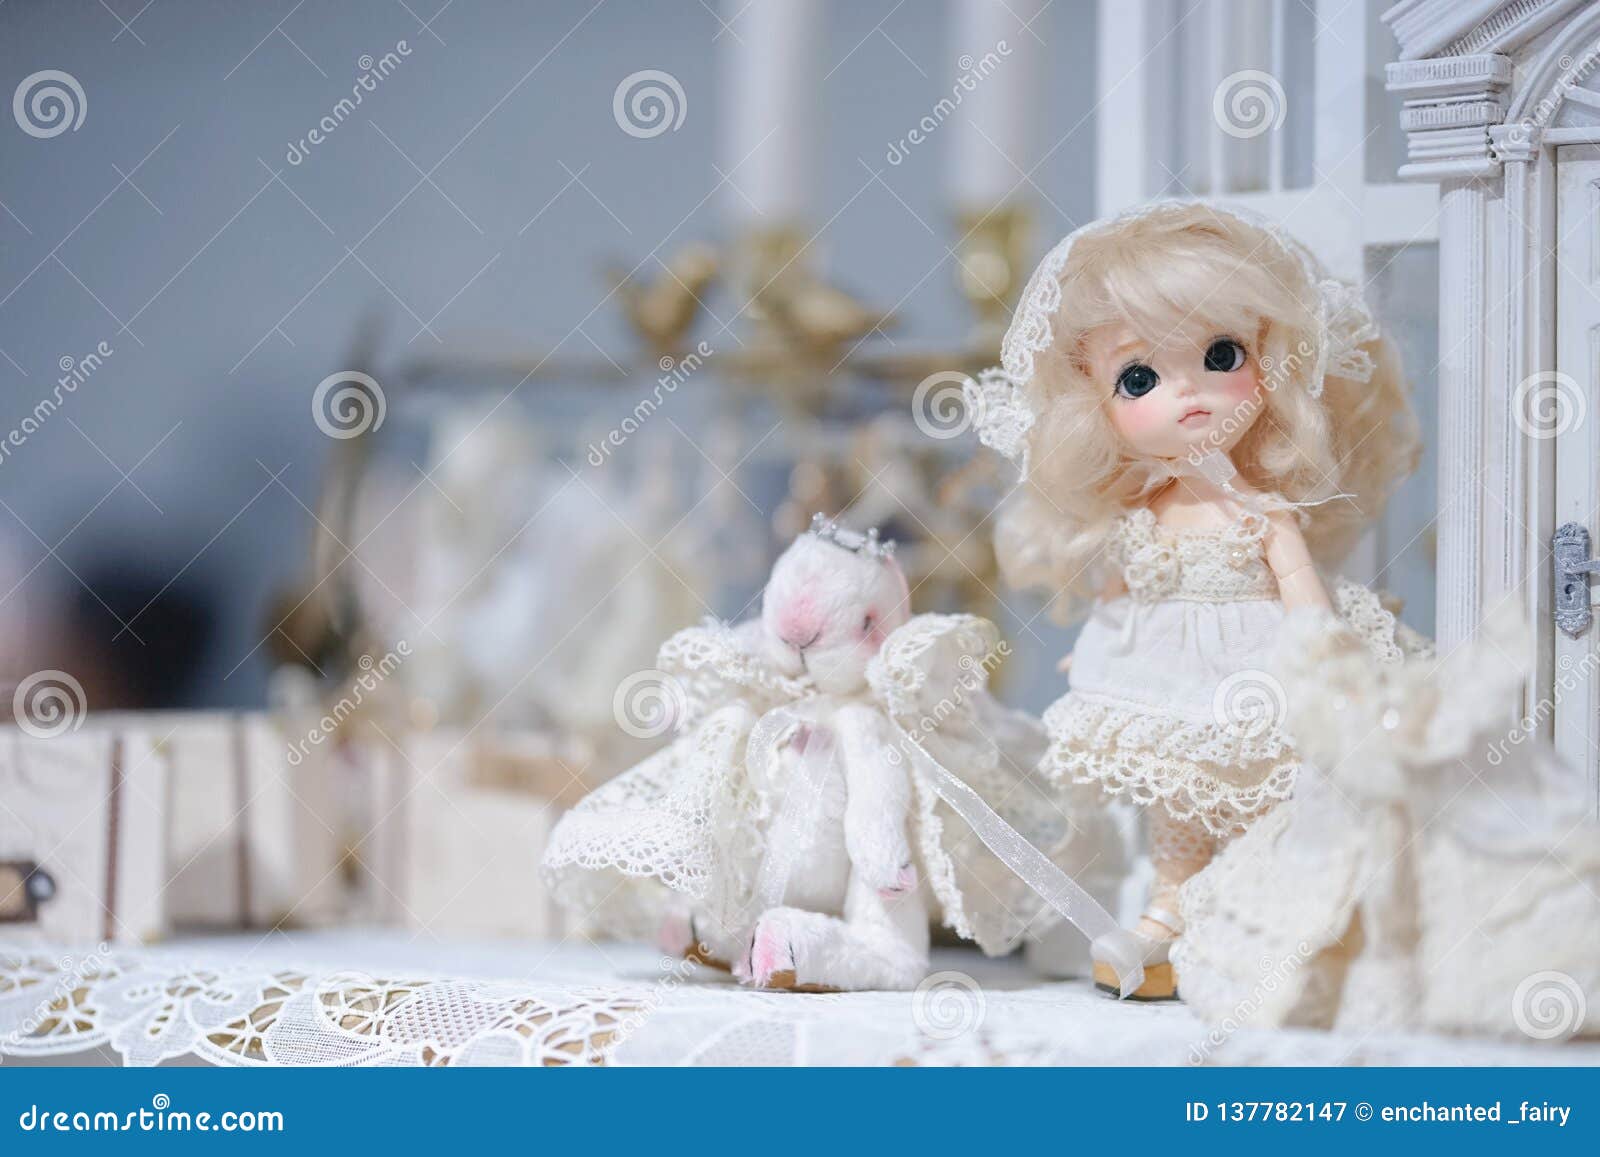 Cute Doll on Display. Kawaii Innocent Girl with Blond Hair in a ...